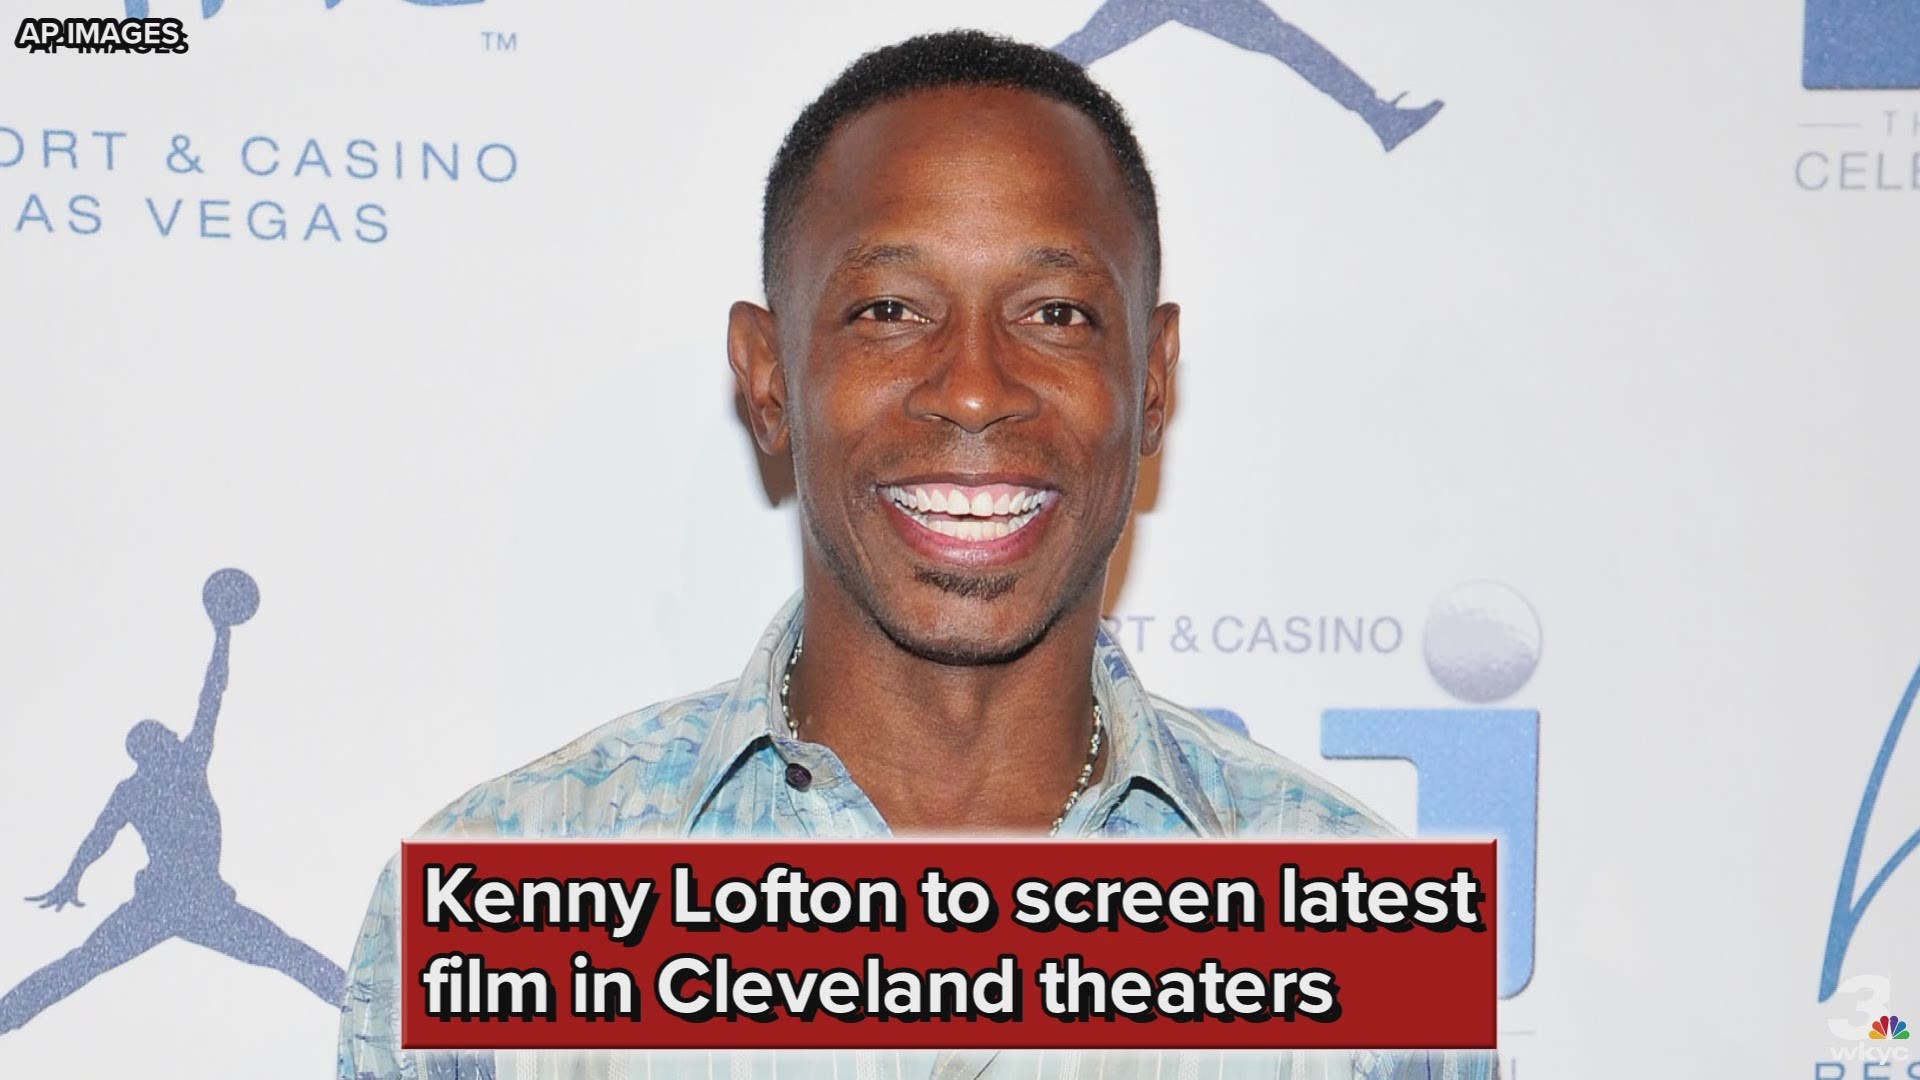 Cleveland Indians great Kenny Lofton presenting latest movie